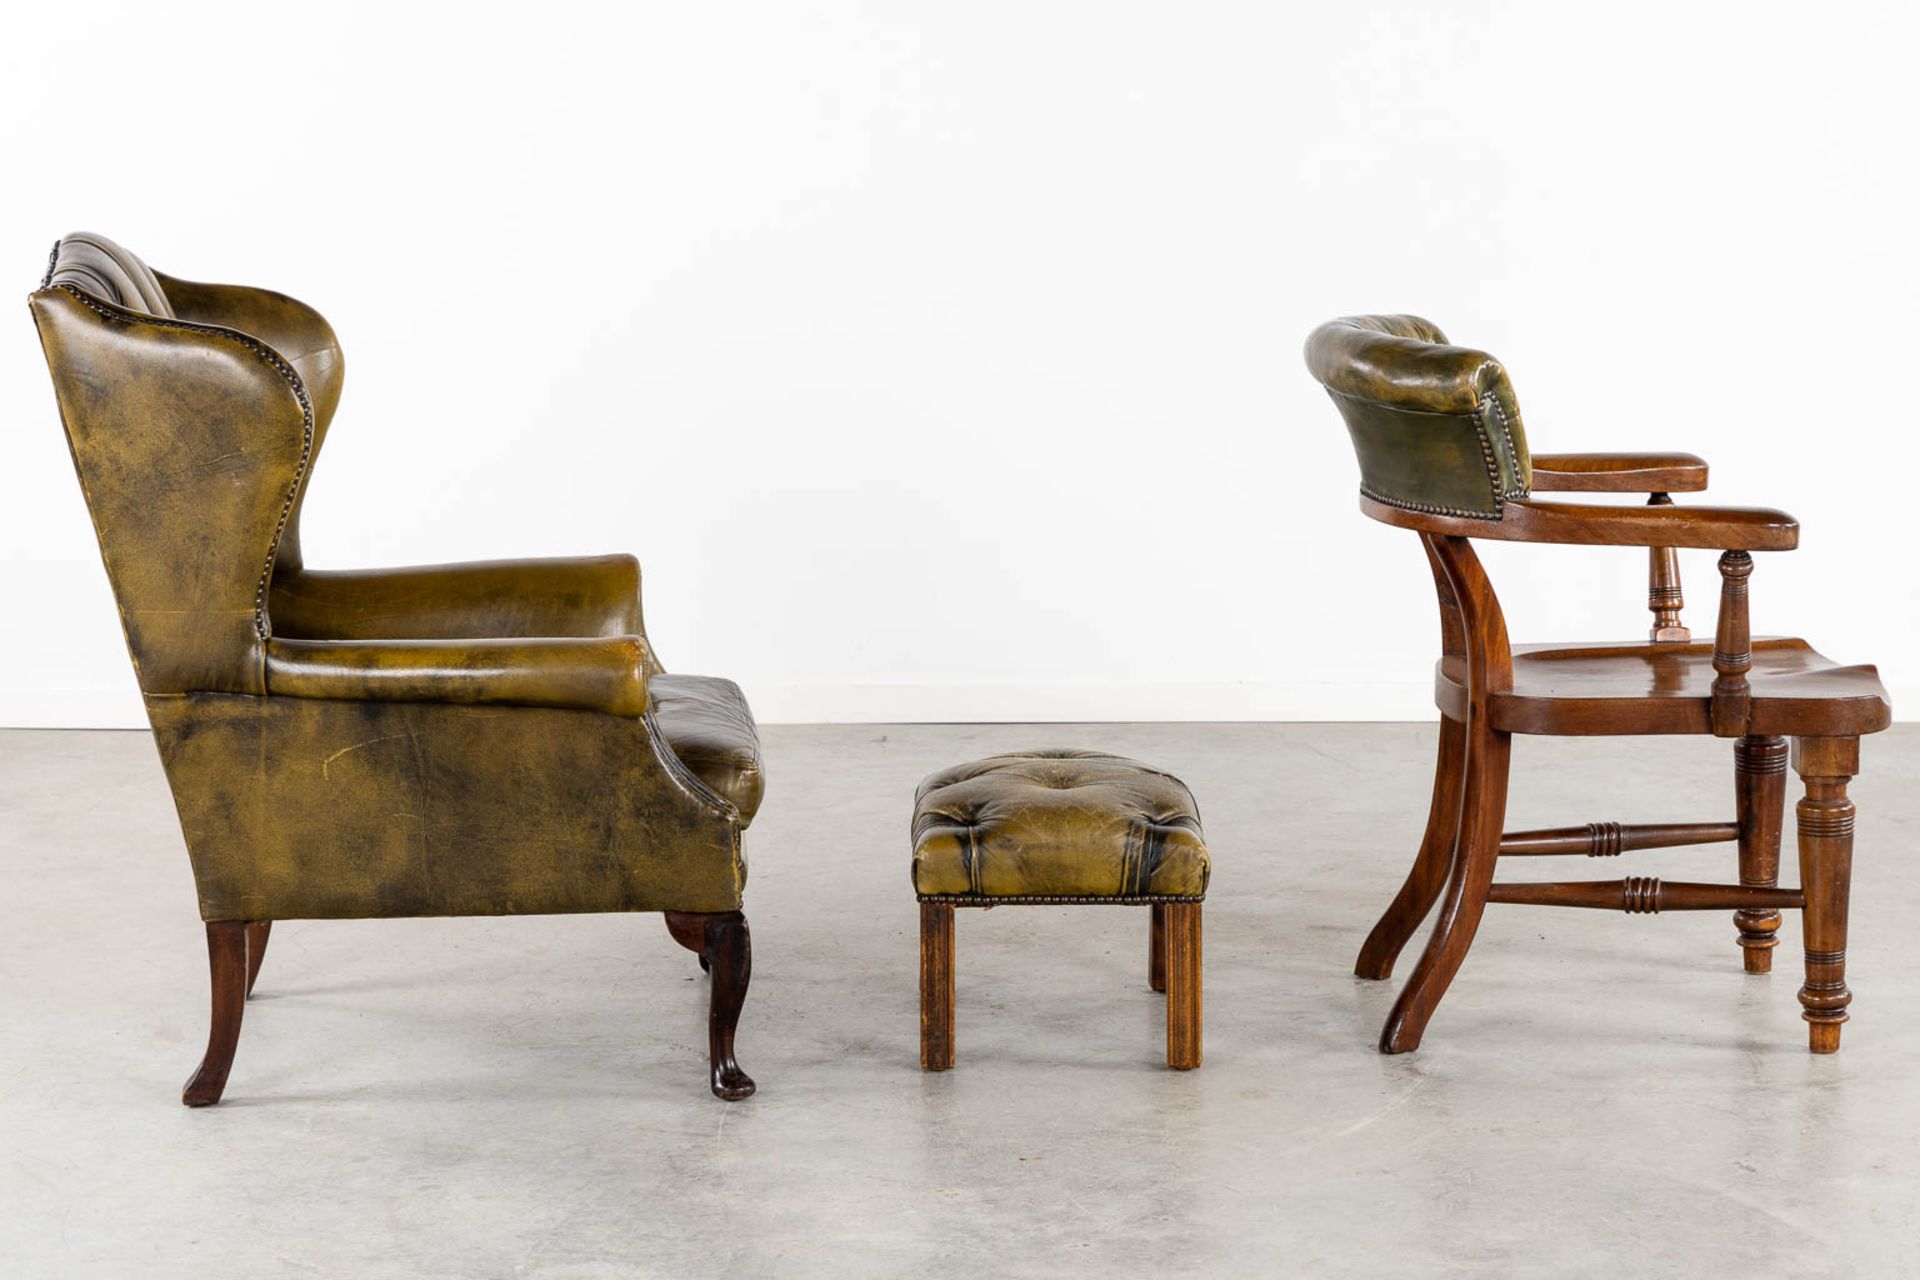 A Lounge chair, office chair and ottoman, Leather on wood, Chesterfield. (L:84 x W:80 x H:100 cm) - Bild 6 aus 13